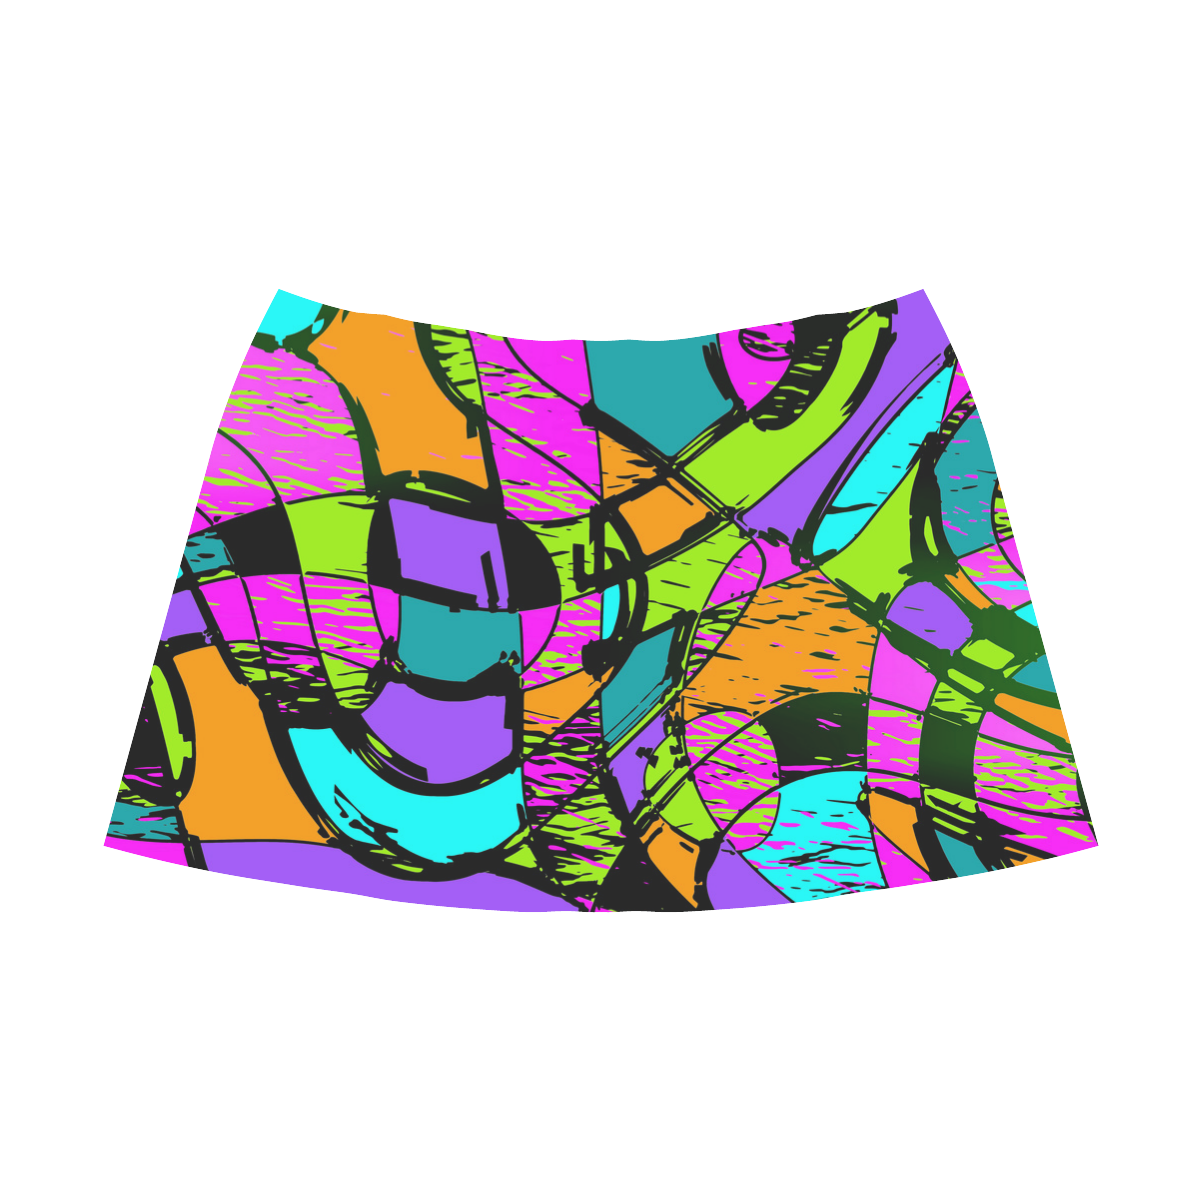 Abstract Art Squiggly Loops Multicolored Mnemosyne Women's Crepe Skirt (Model D16)